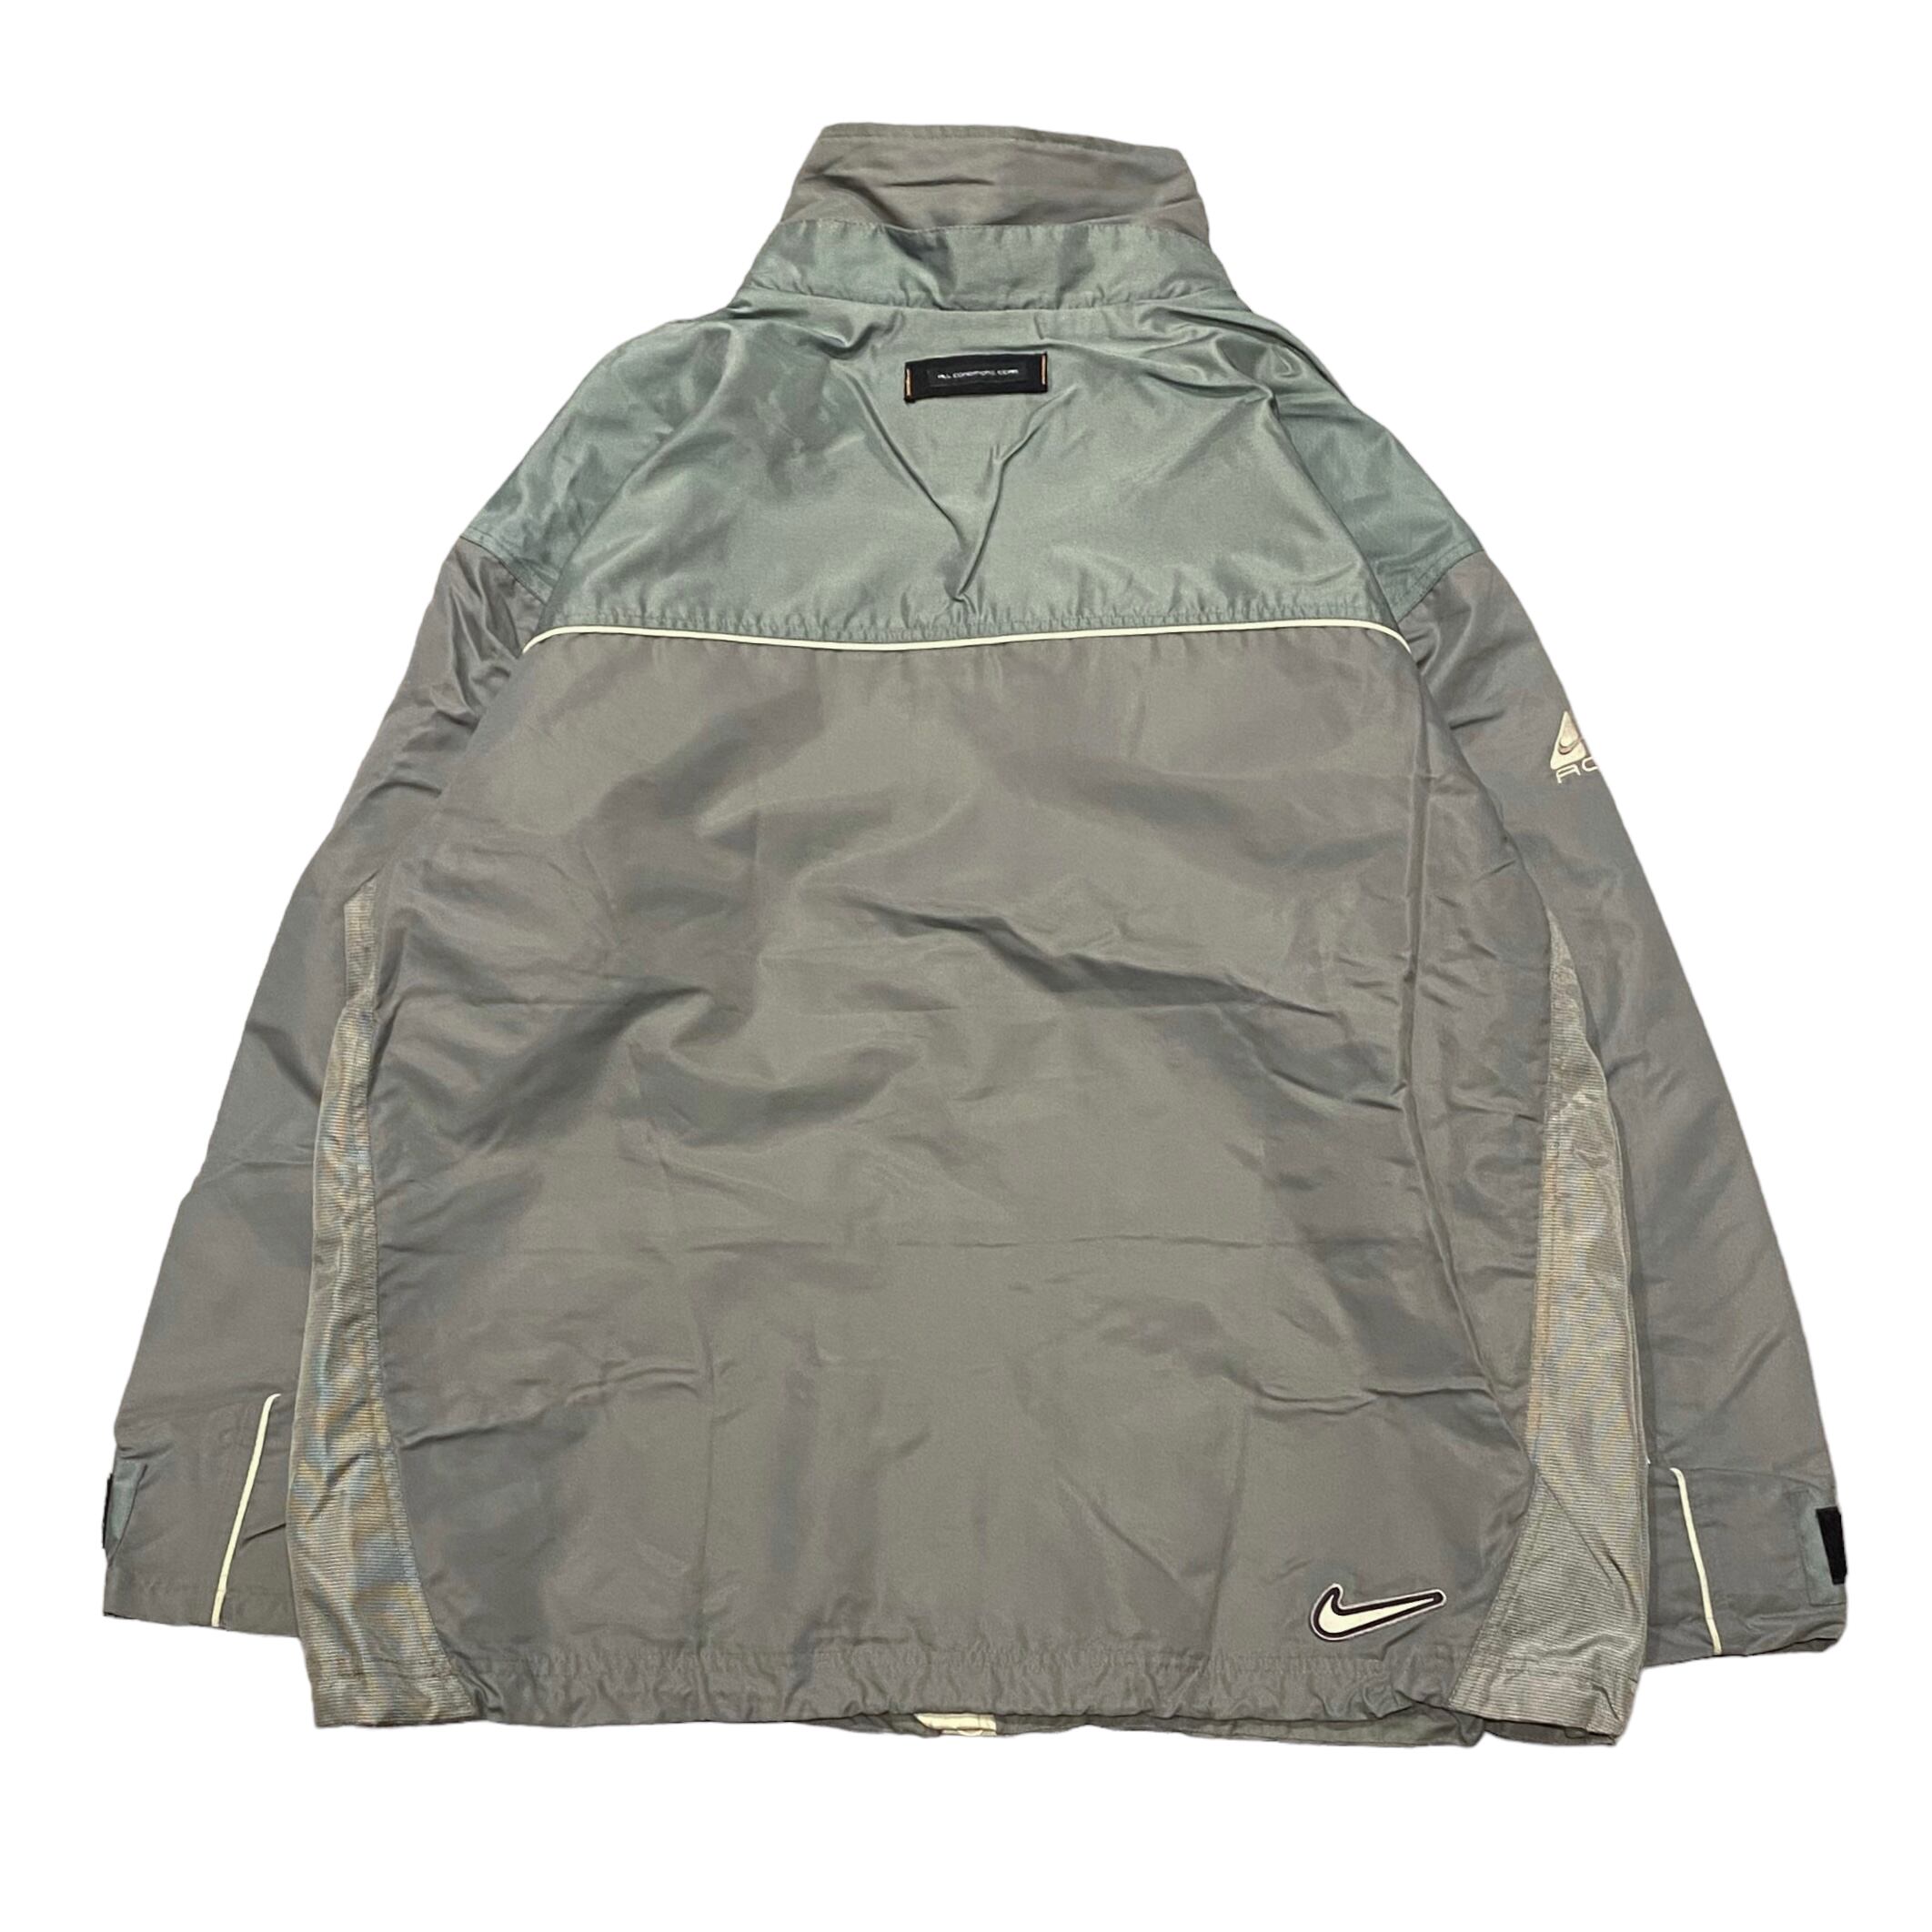 90-00's Nike ACG Outer Layer 3 Mountain Jacket L / ナイキACG